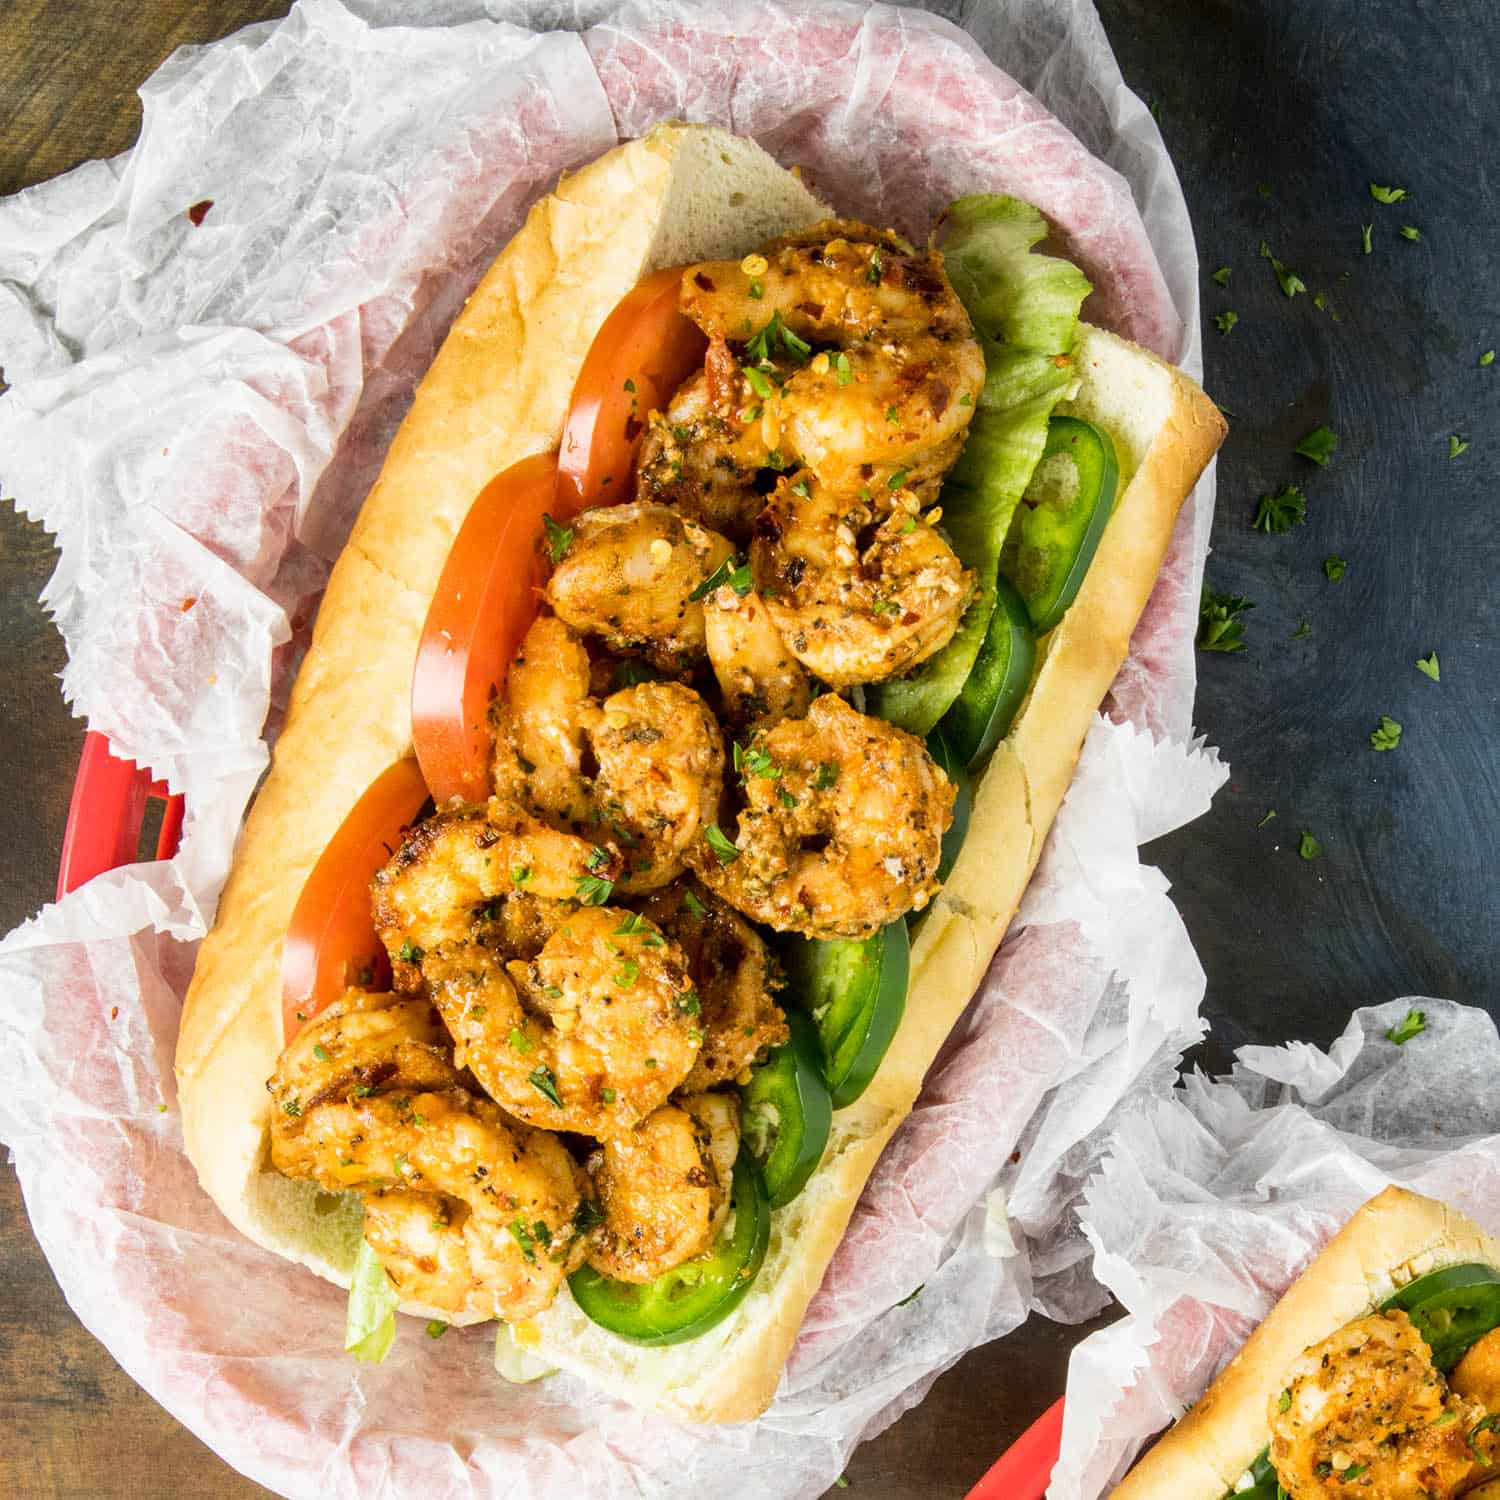 Shrimp Po Boy Recipe with Cajun Remoulade - Simply Whisked